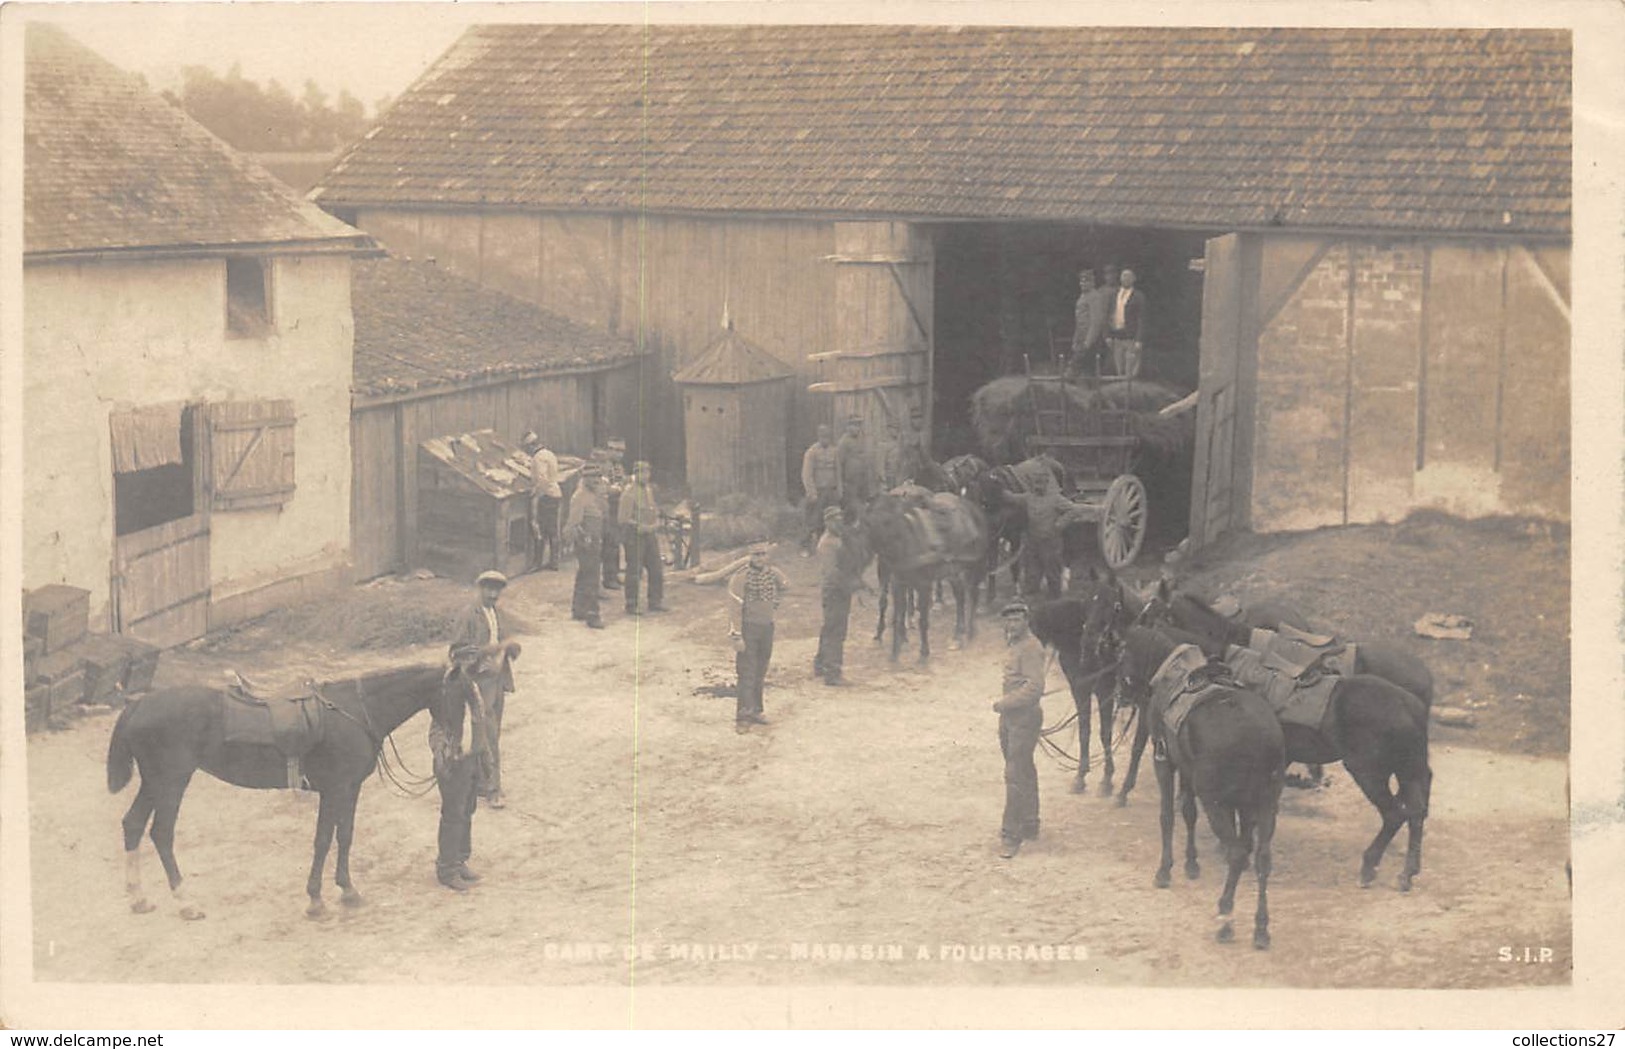 10-CAMP DE MAILLY-CARTE-PHOTO- MAGASIN DE FOURRAGES - Mailly-le-Camp